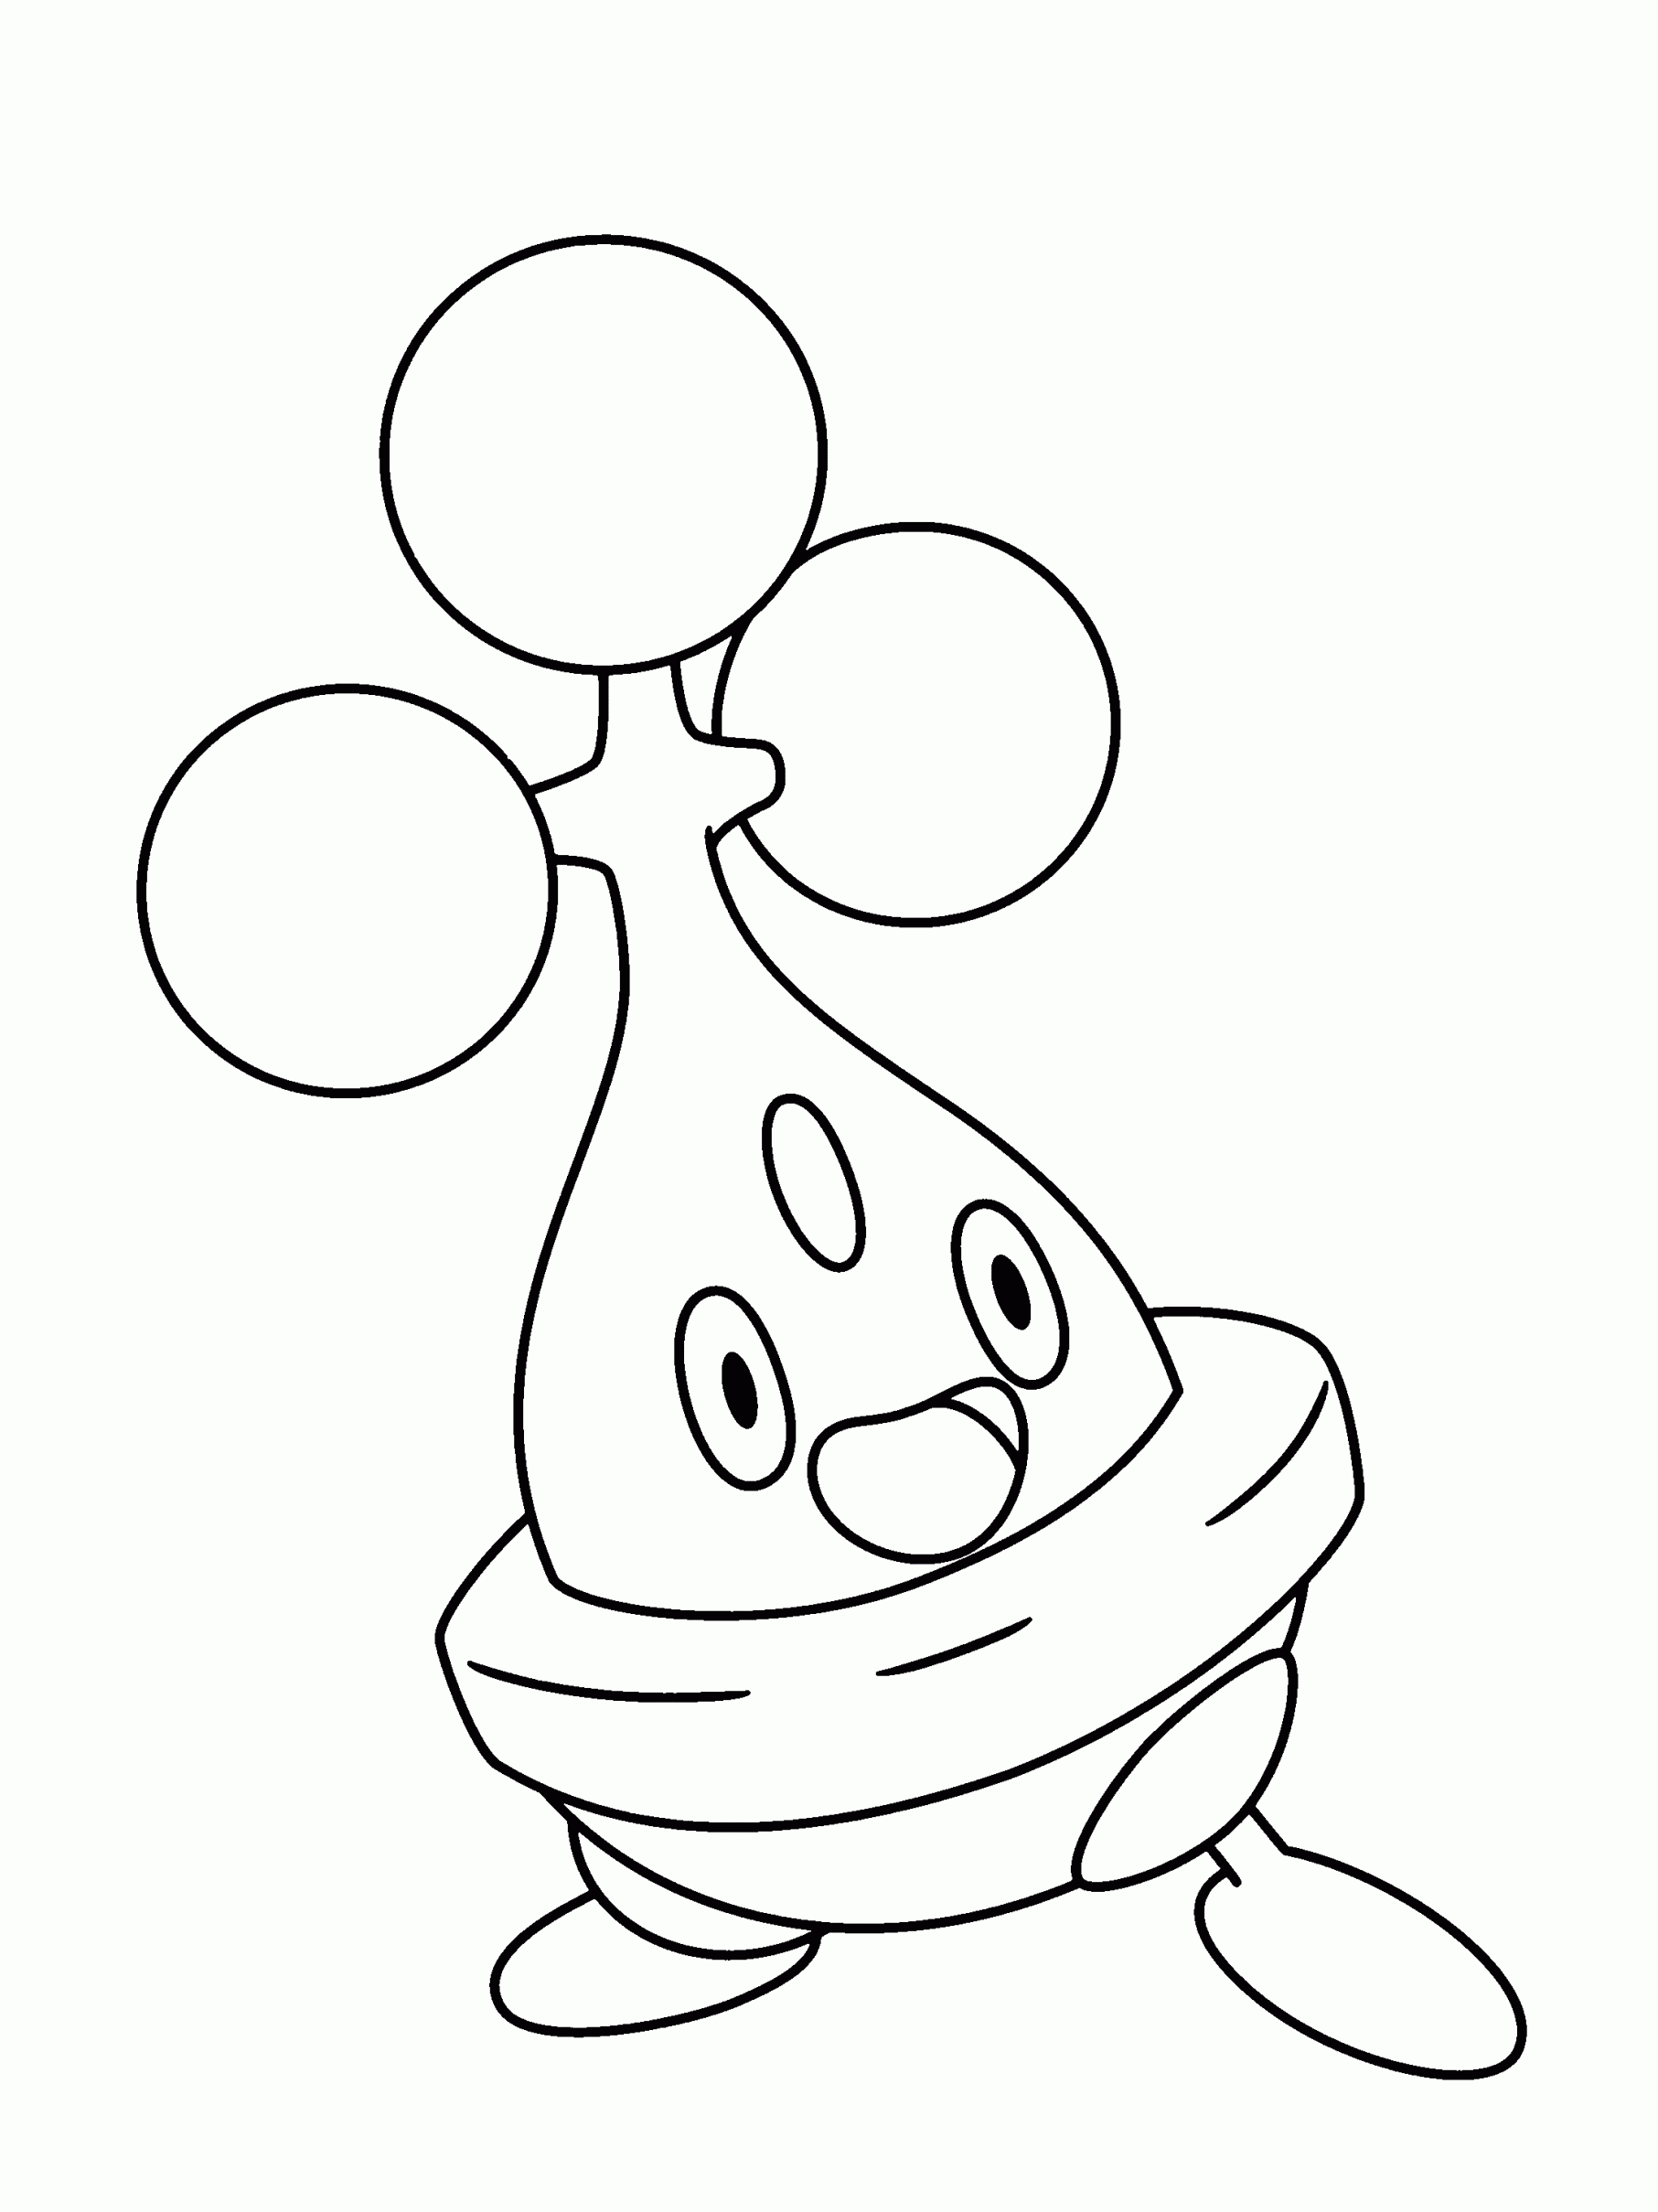 Pokemon Bonsly coloring pages to print